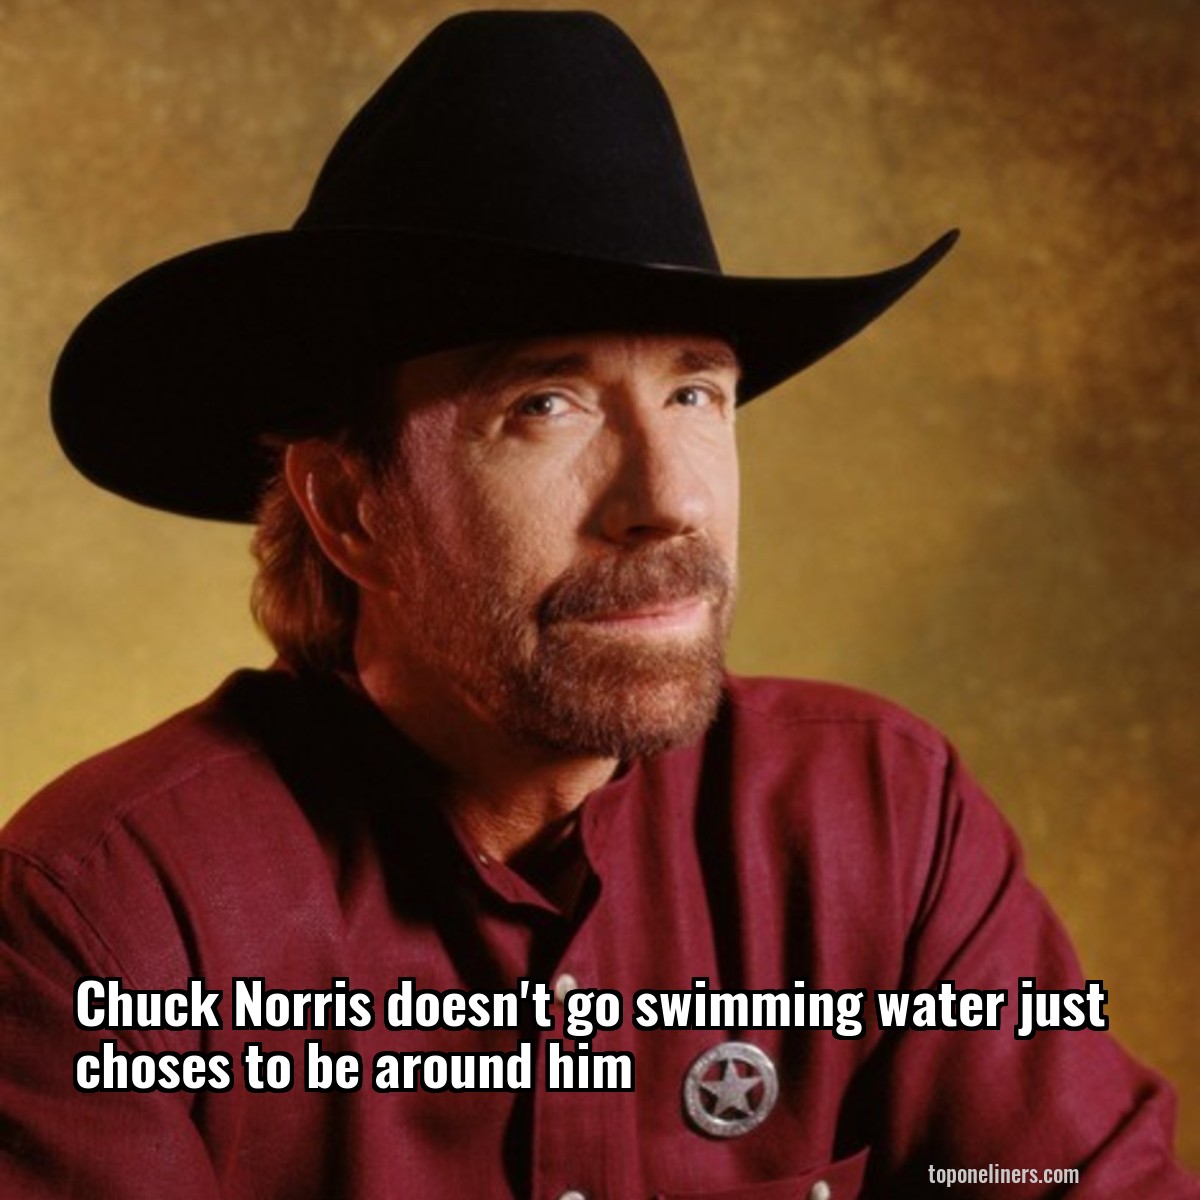 Chuck Norris doesn't go swimming water just choses to be around him